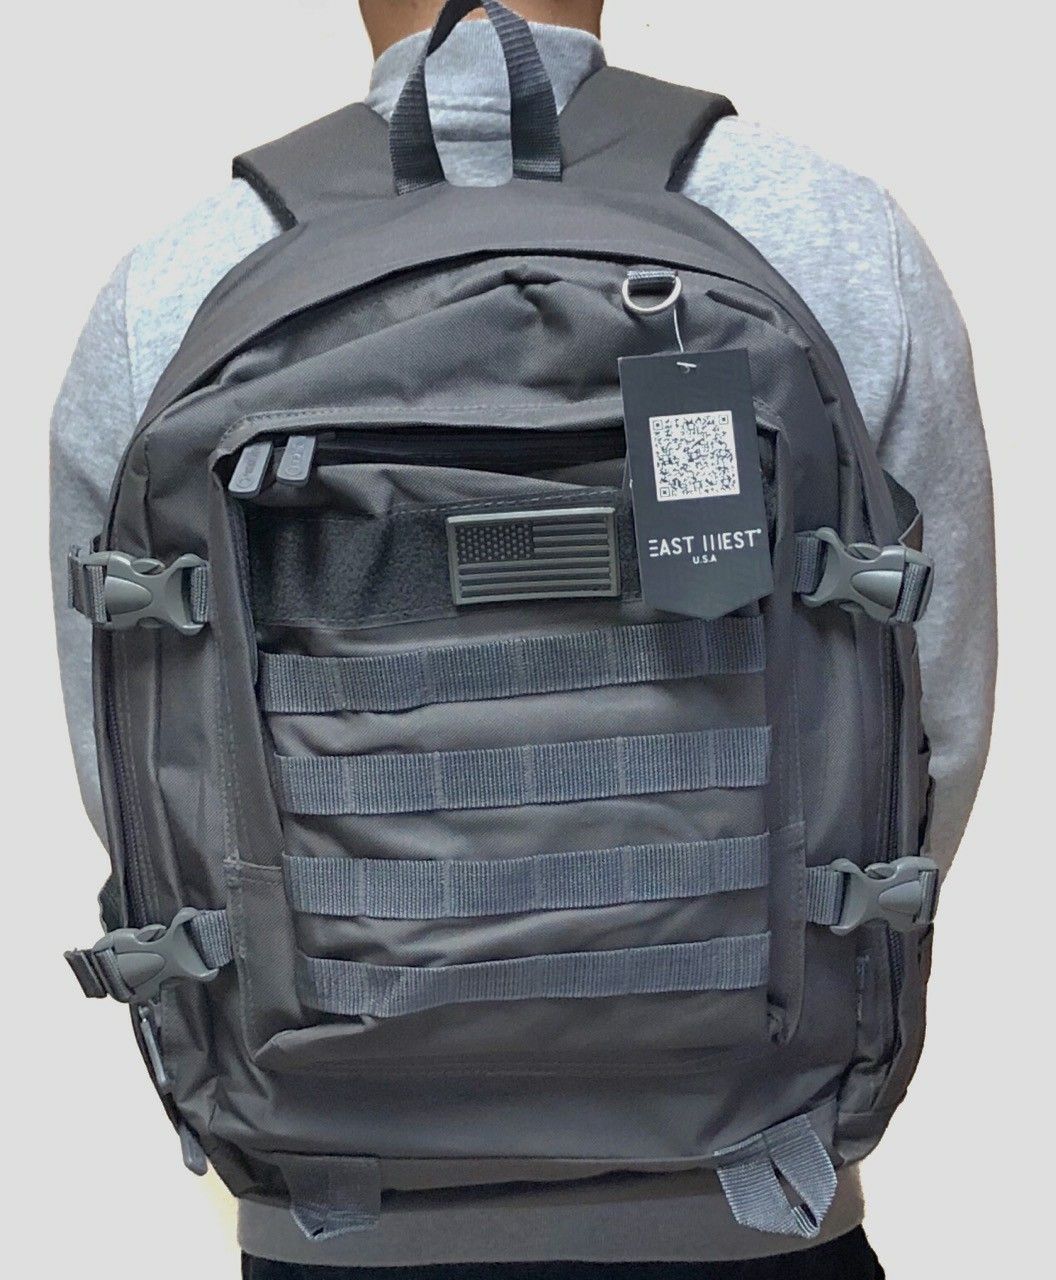 Brand NEW! Large Tactical Molle Backpack For Everyday Use/Outdoors/Sports/Gym/Hiking/Biking/Hunting/Fishing/Outdoors/Sports/EDC $24